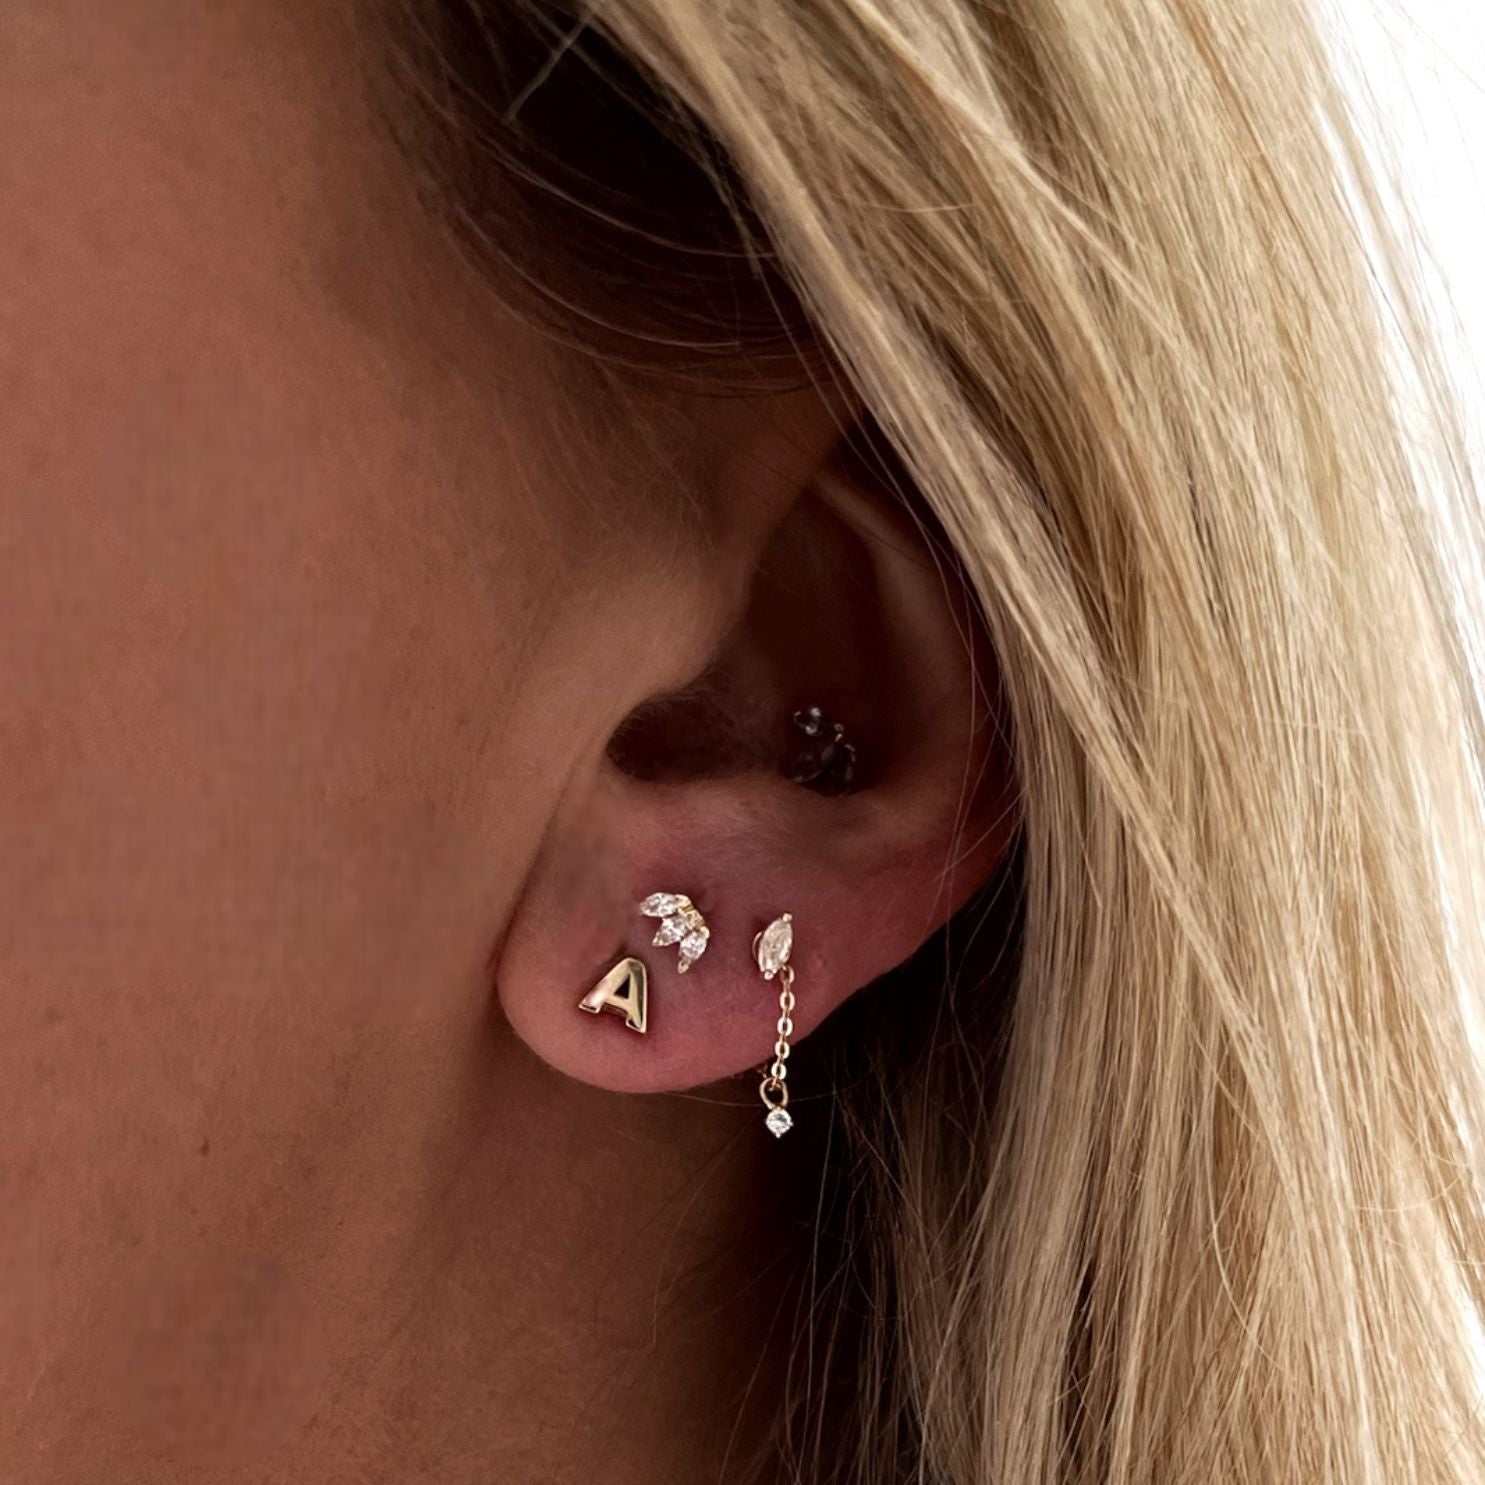 Lottie Leigh x Helix & Conch 9k solid gold initial stud with butterfly back - Helix & Conch